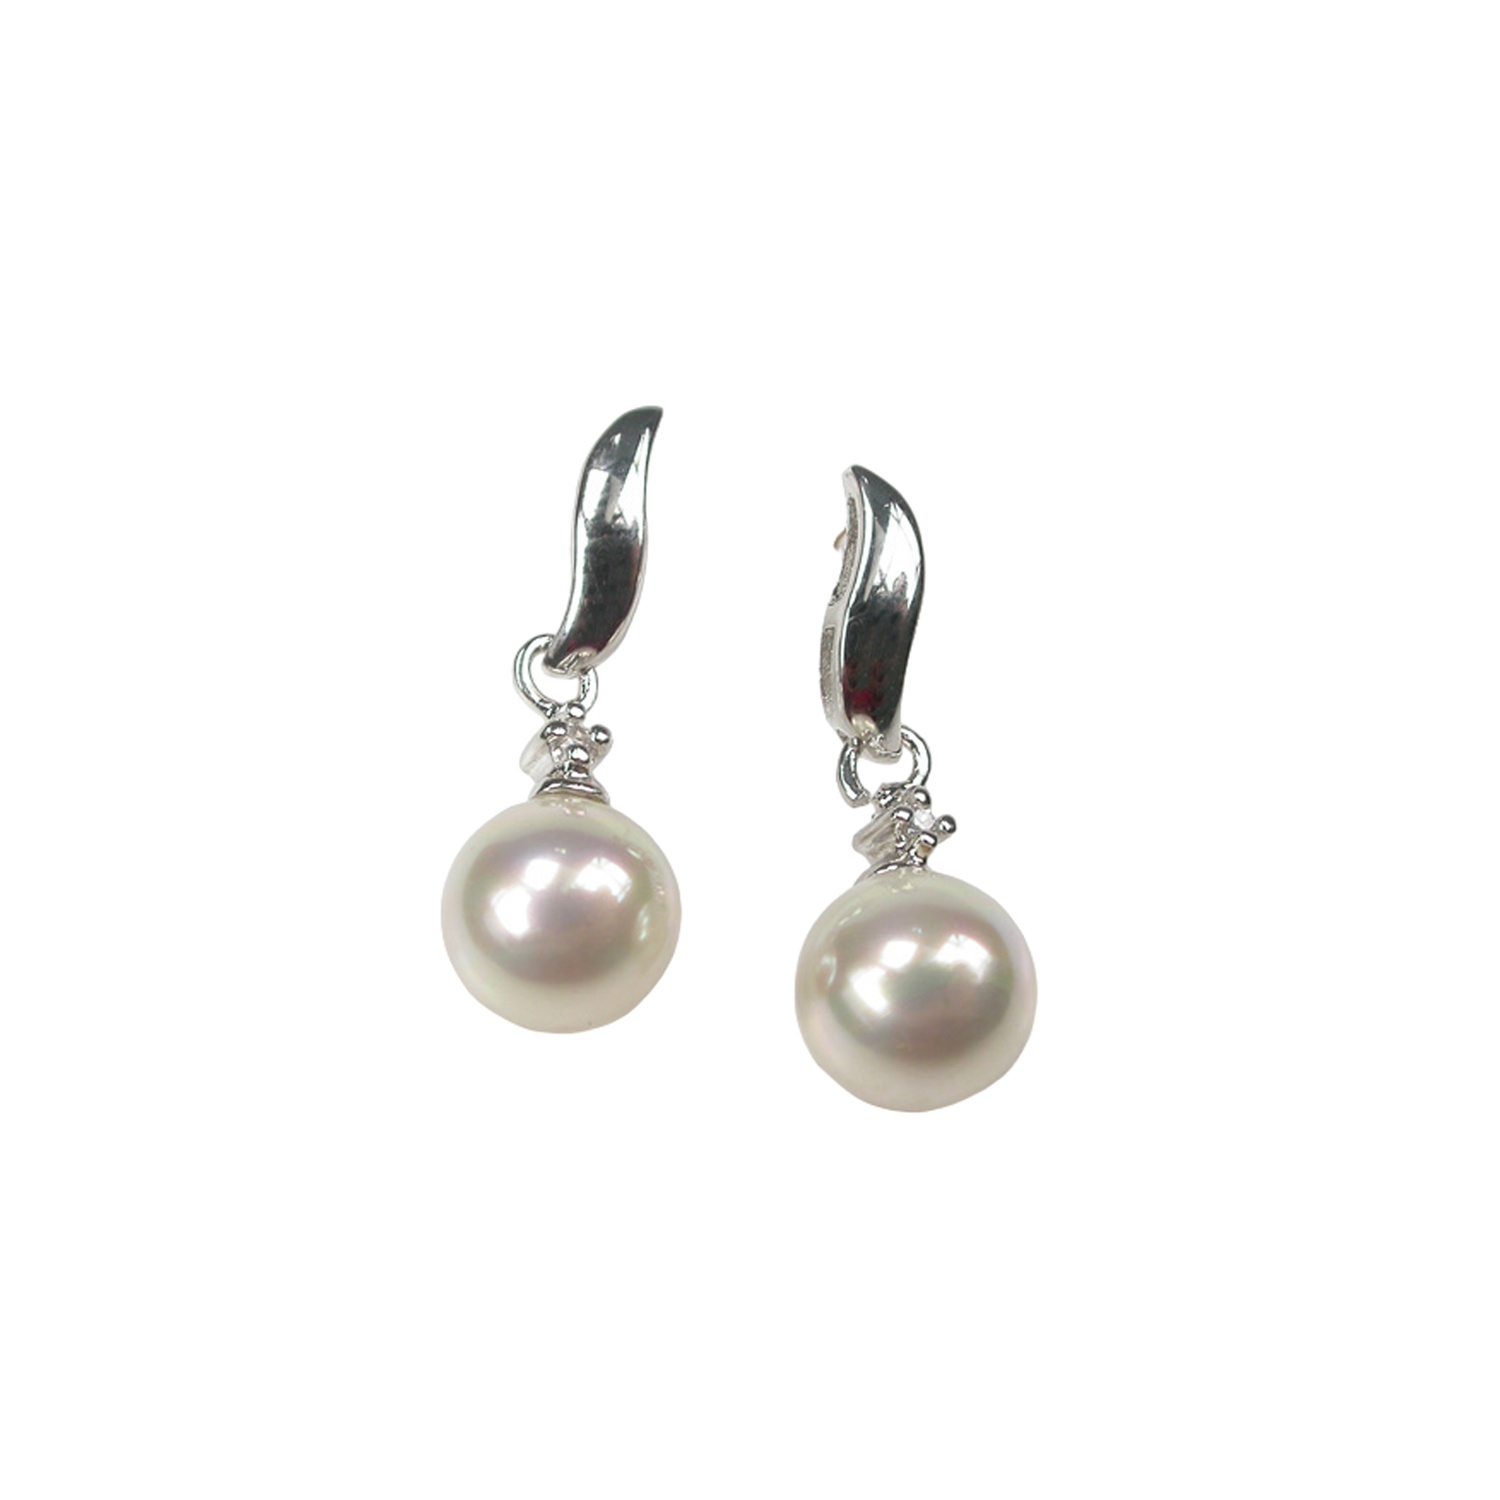 Sterling Silver Earrings with 8 mm Pearls and Zirconias